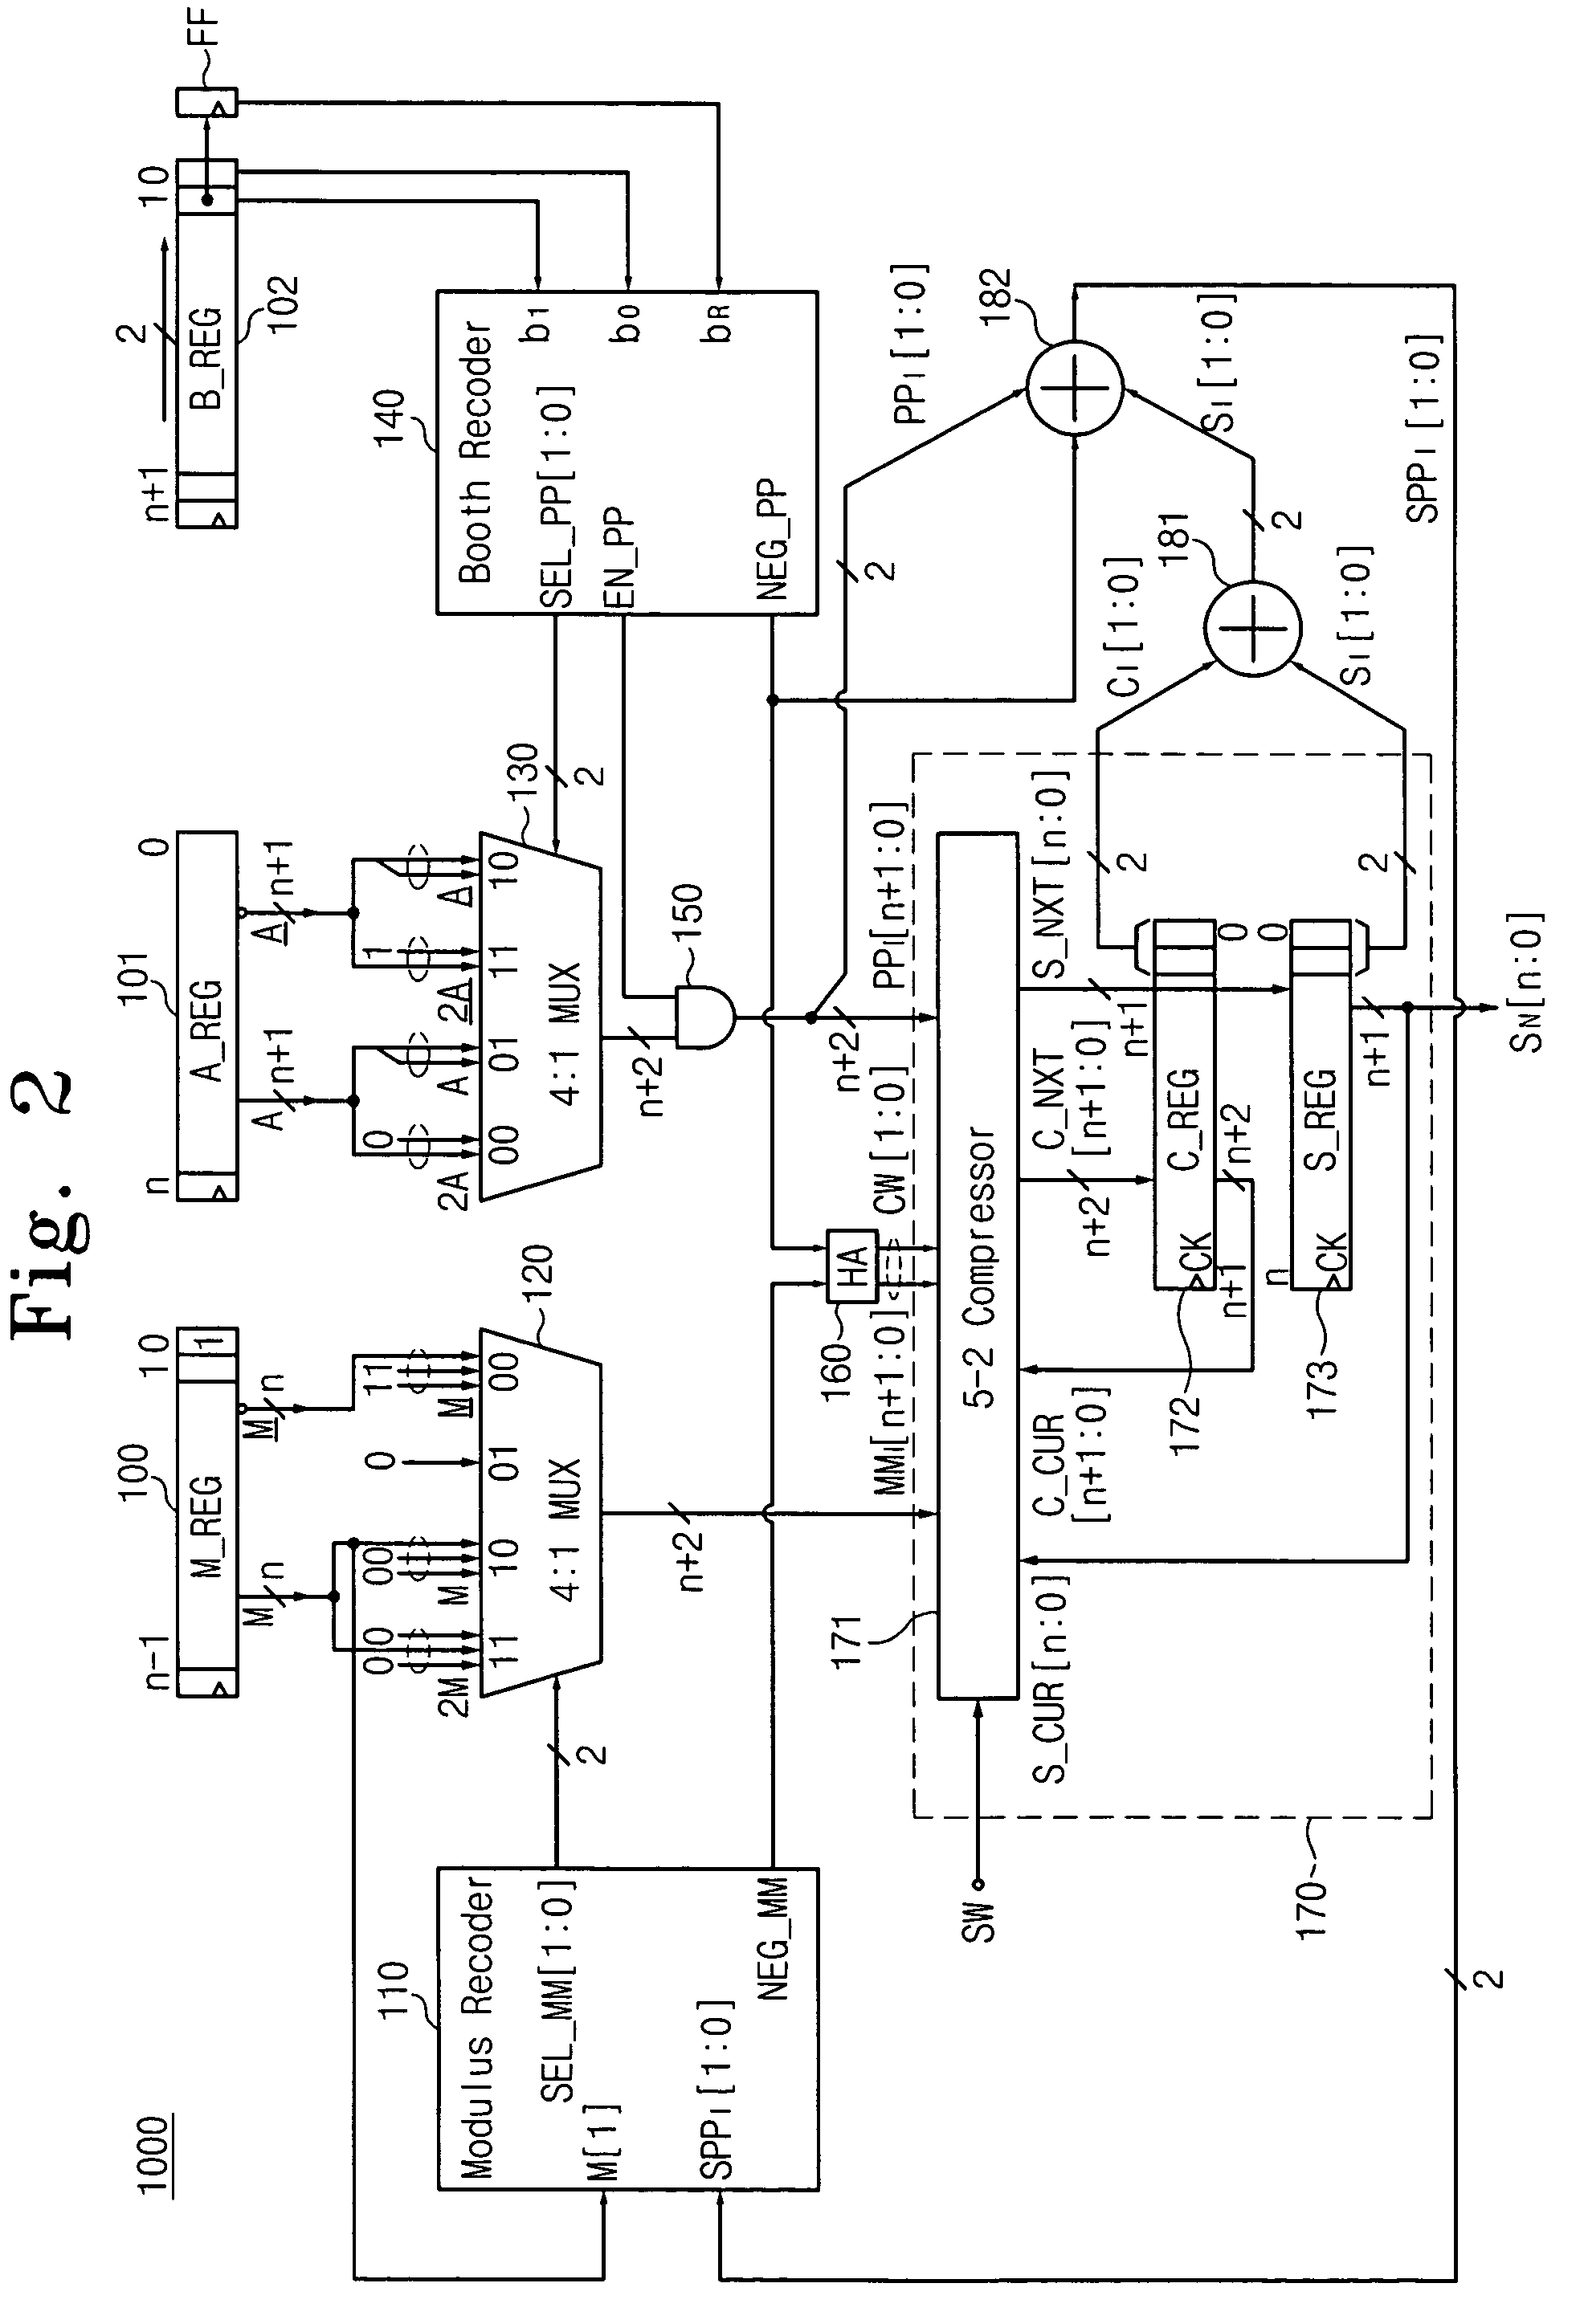 Montgomery modular multiplier and method thereof using carry save addition